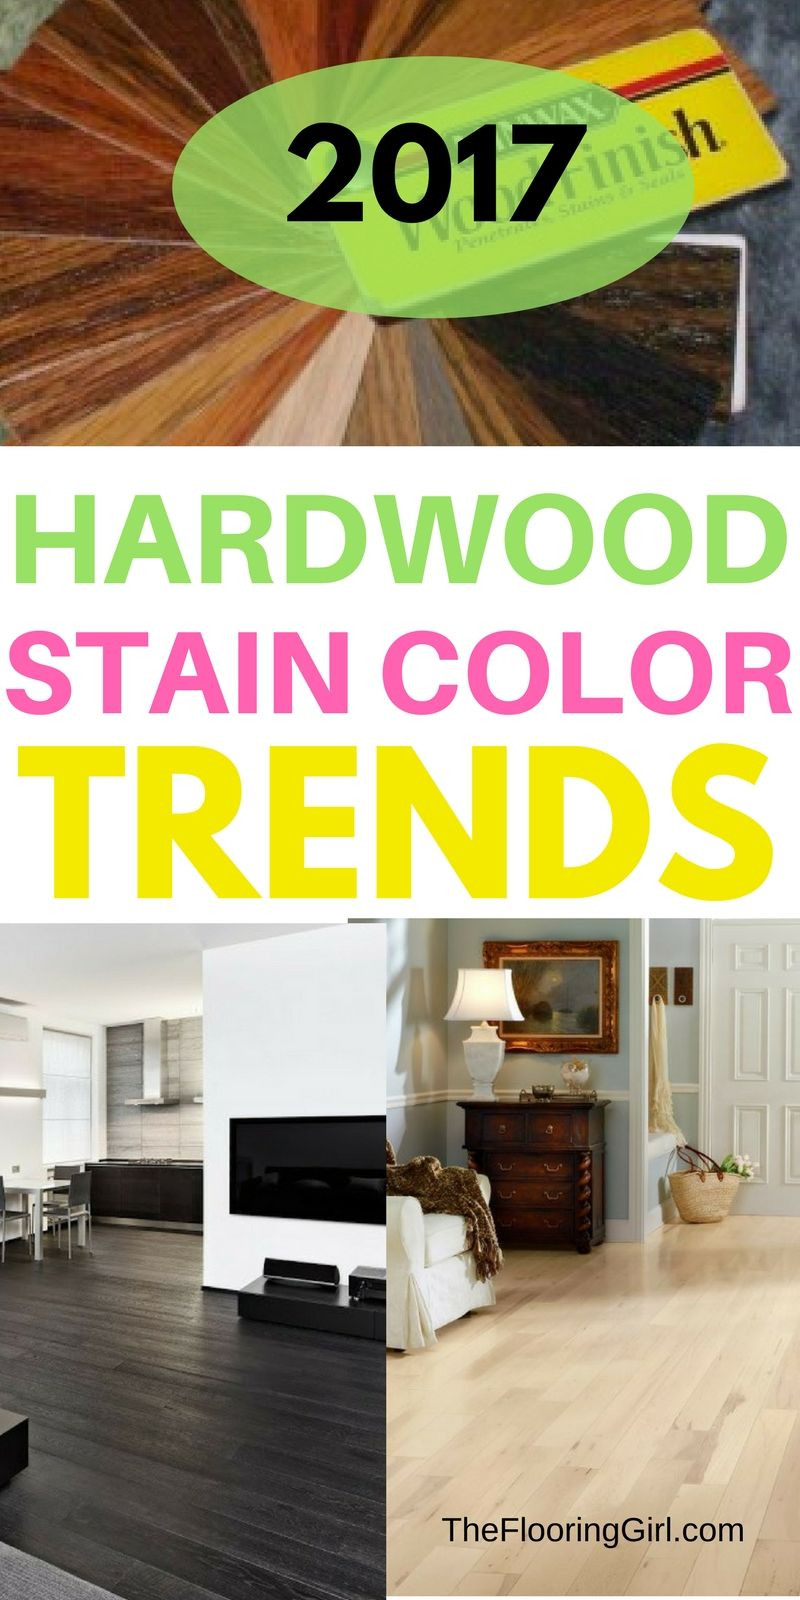 most popular hardwood floors 2016 of hardwood flooring stain color trends 2018 more from the flooring for hardwood flooring stain color trends for 2017 hardwood colors that are in style theflooringgirl com